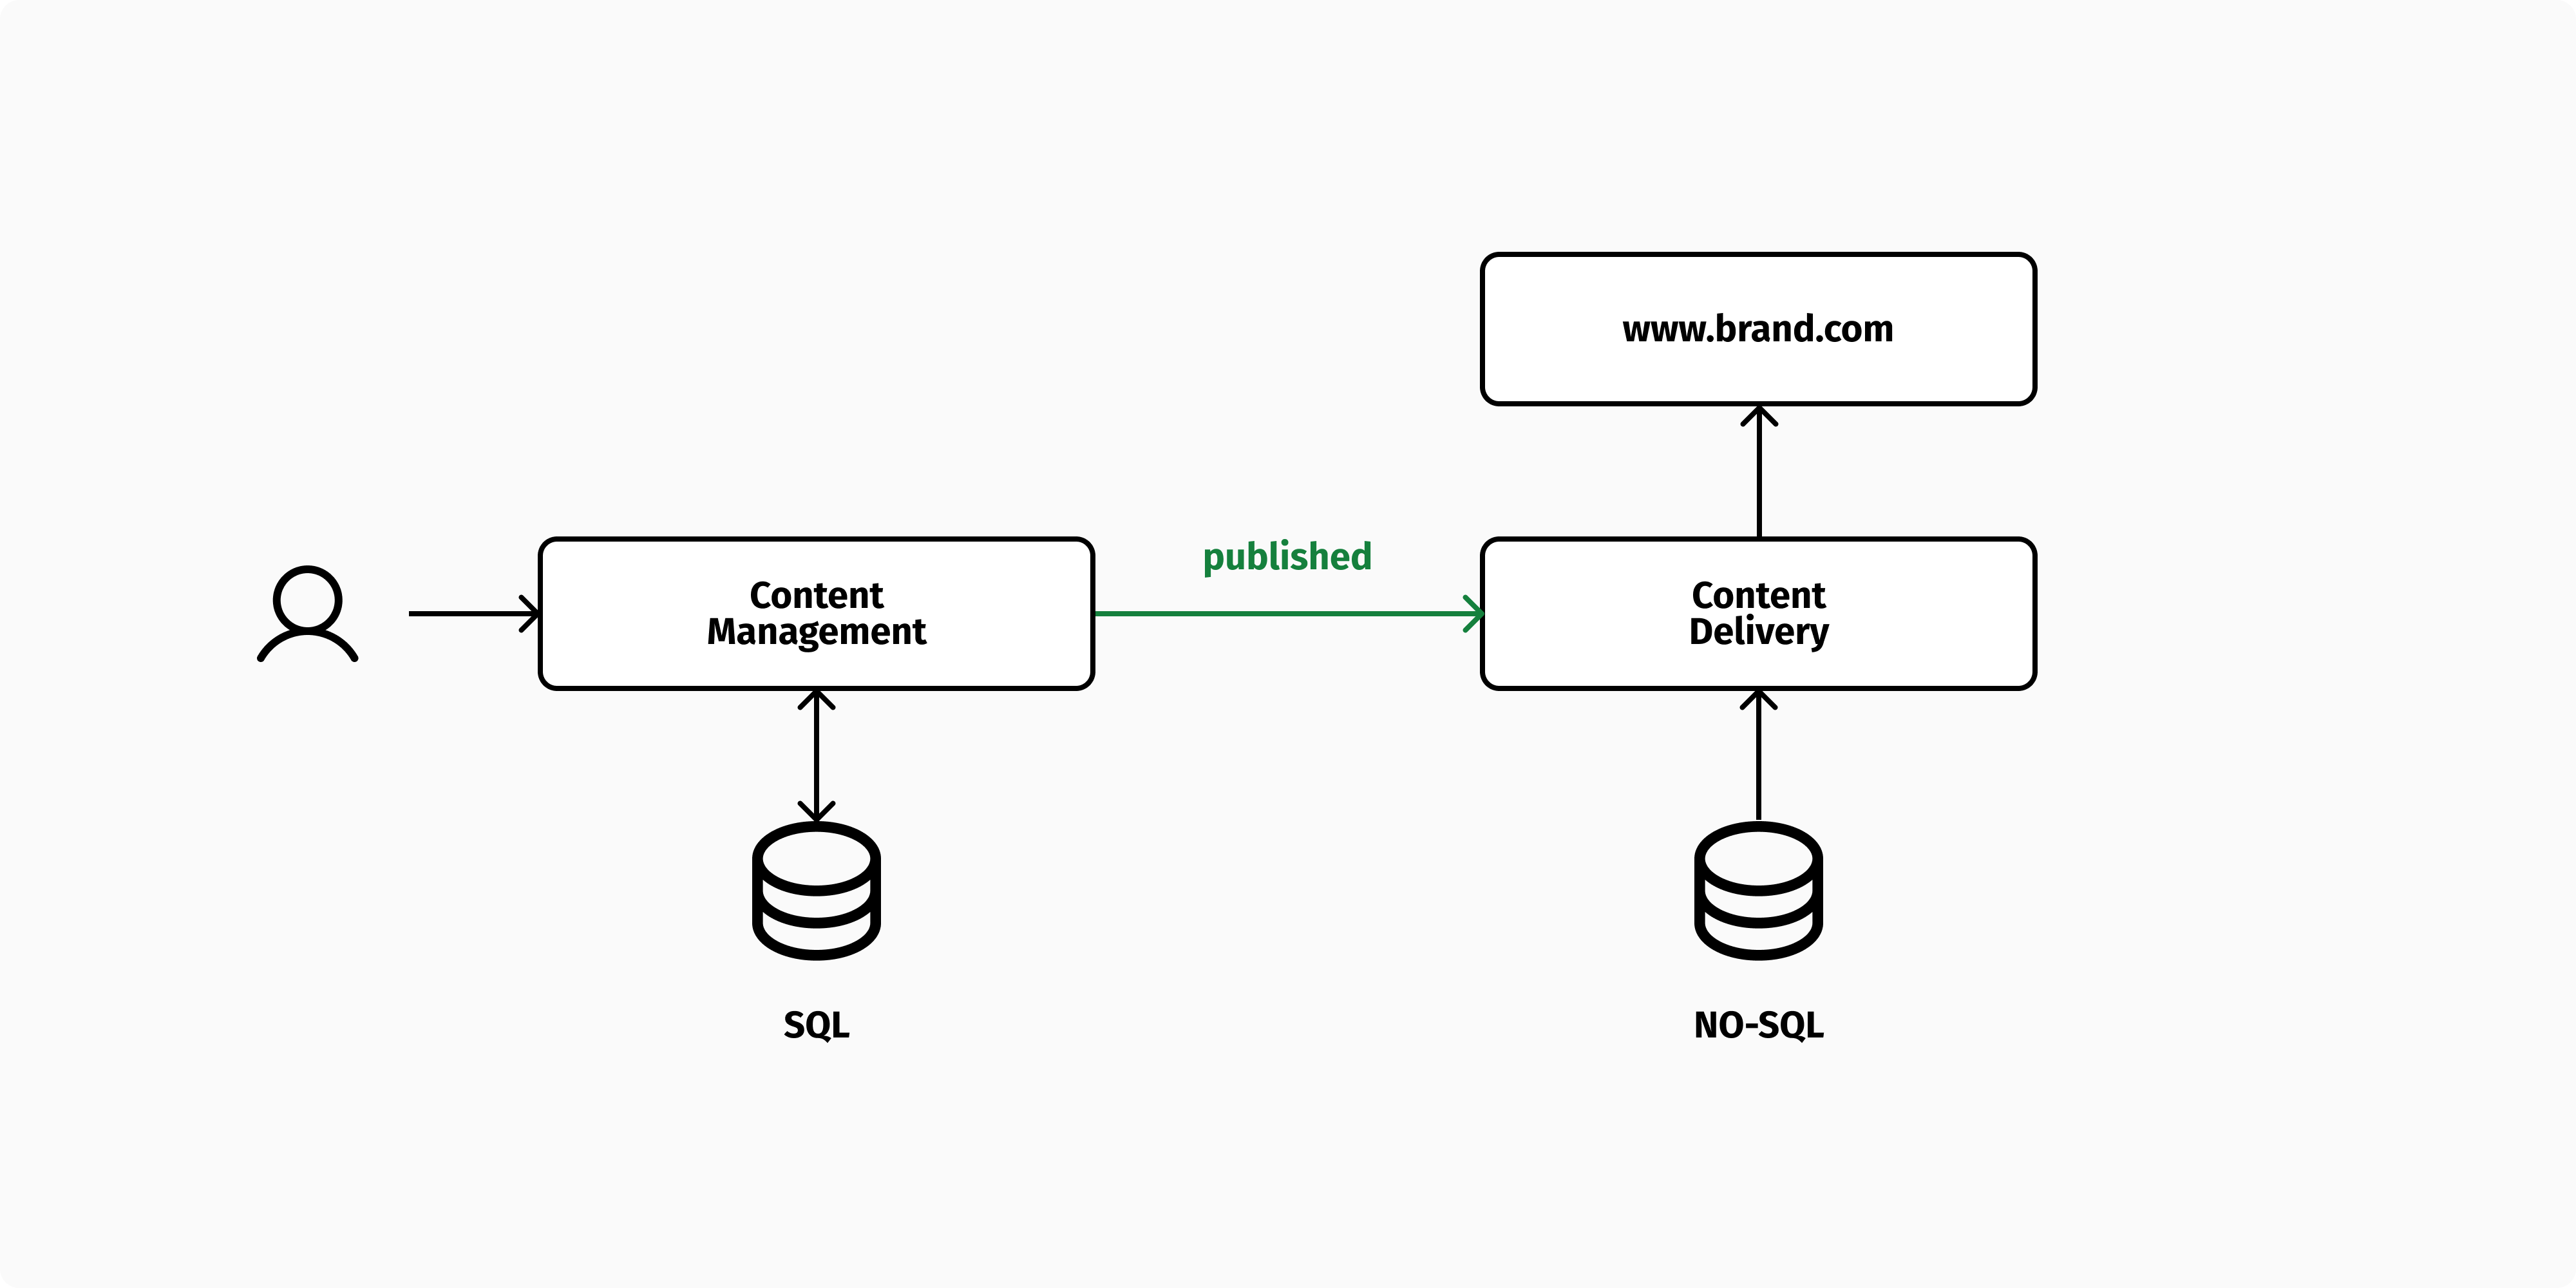 Content is published physically with a two-stack CMS.